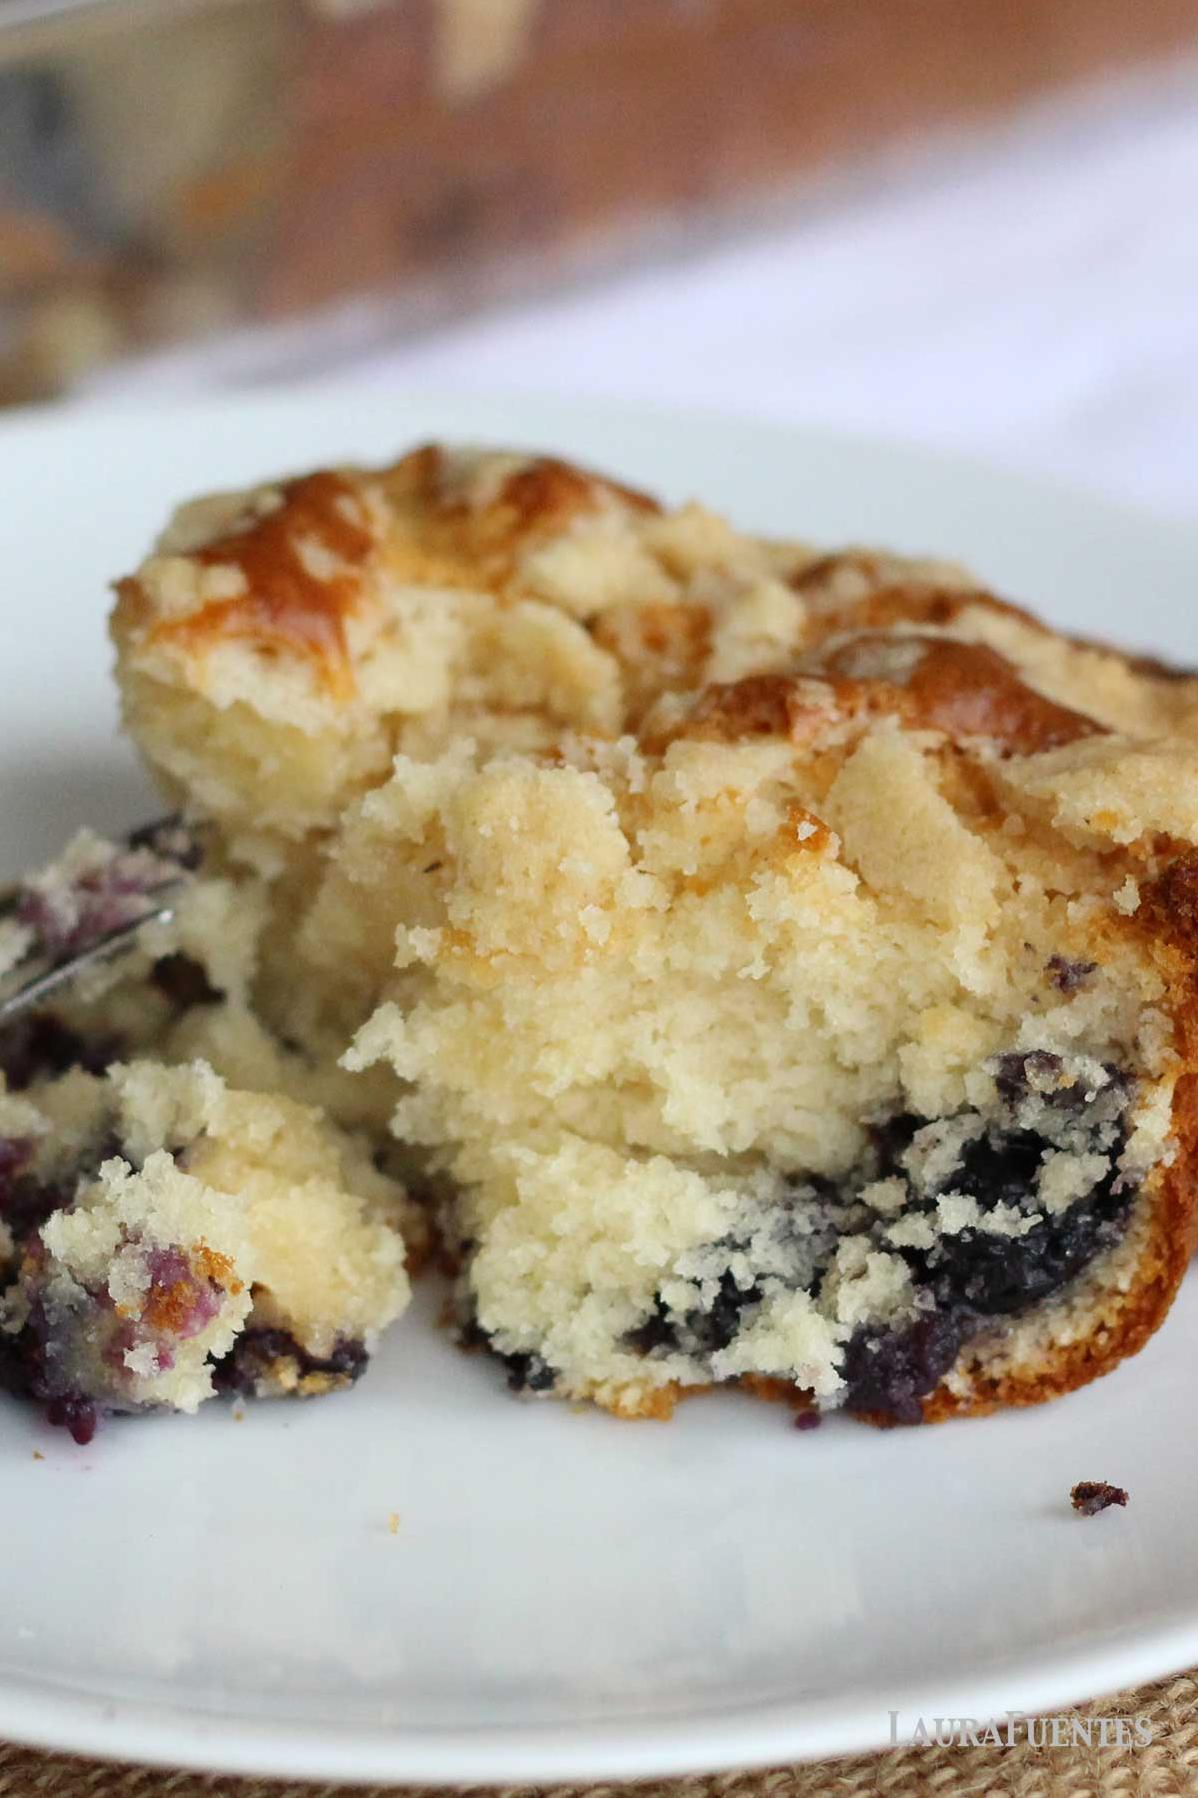  Enjoy the aroma of fresh baking as this blueberry coffee cake bakes in your oven.